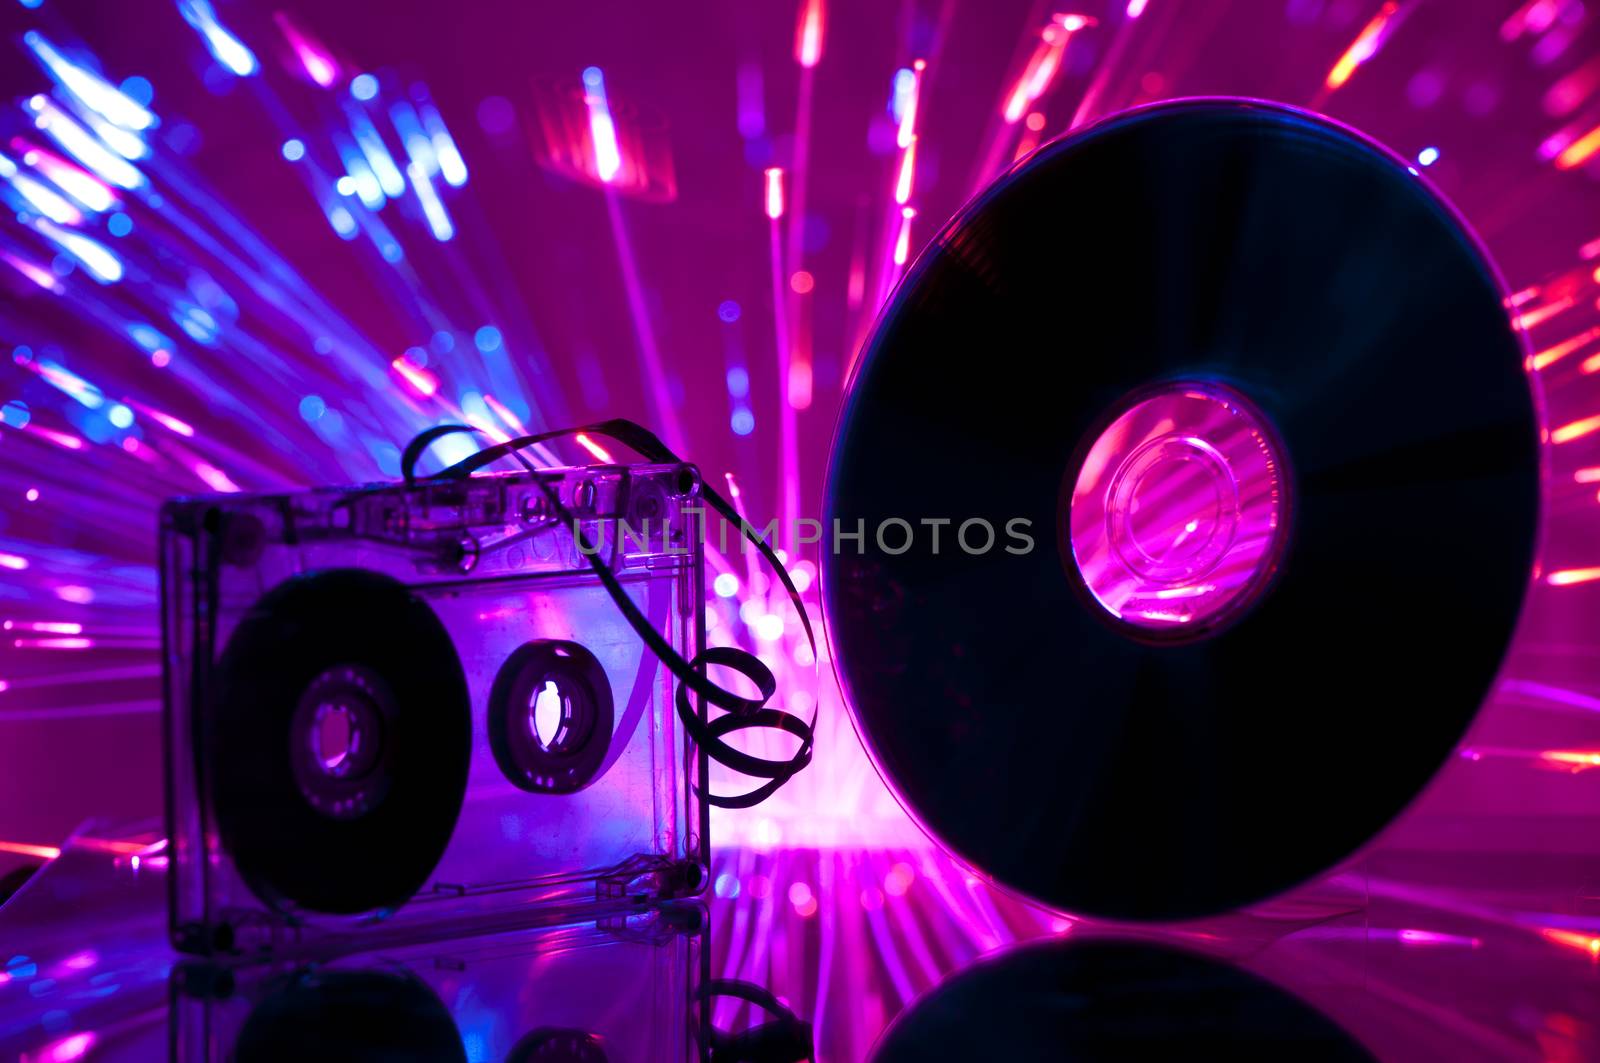 Cassette tape and CD. Multicolored blue lights on background